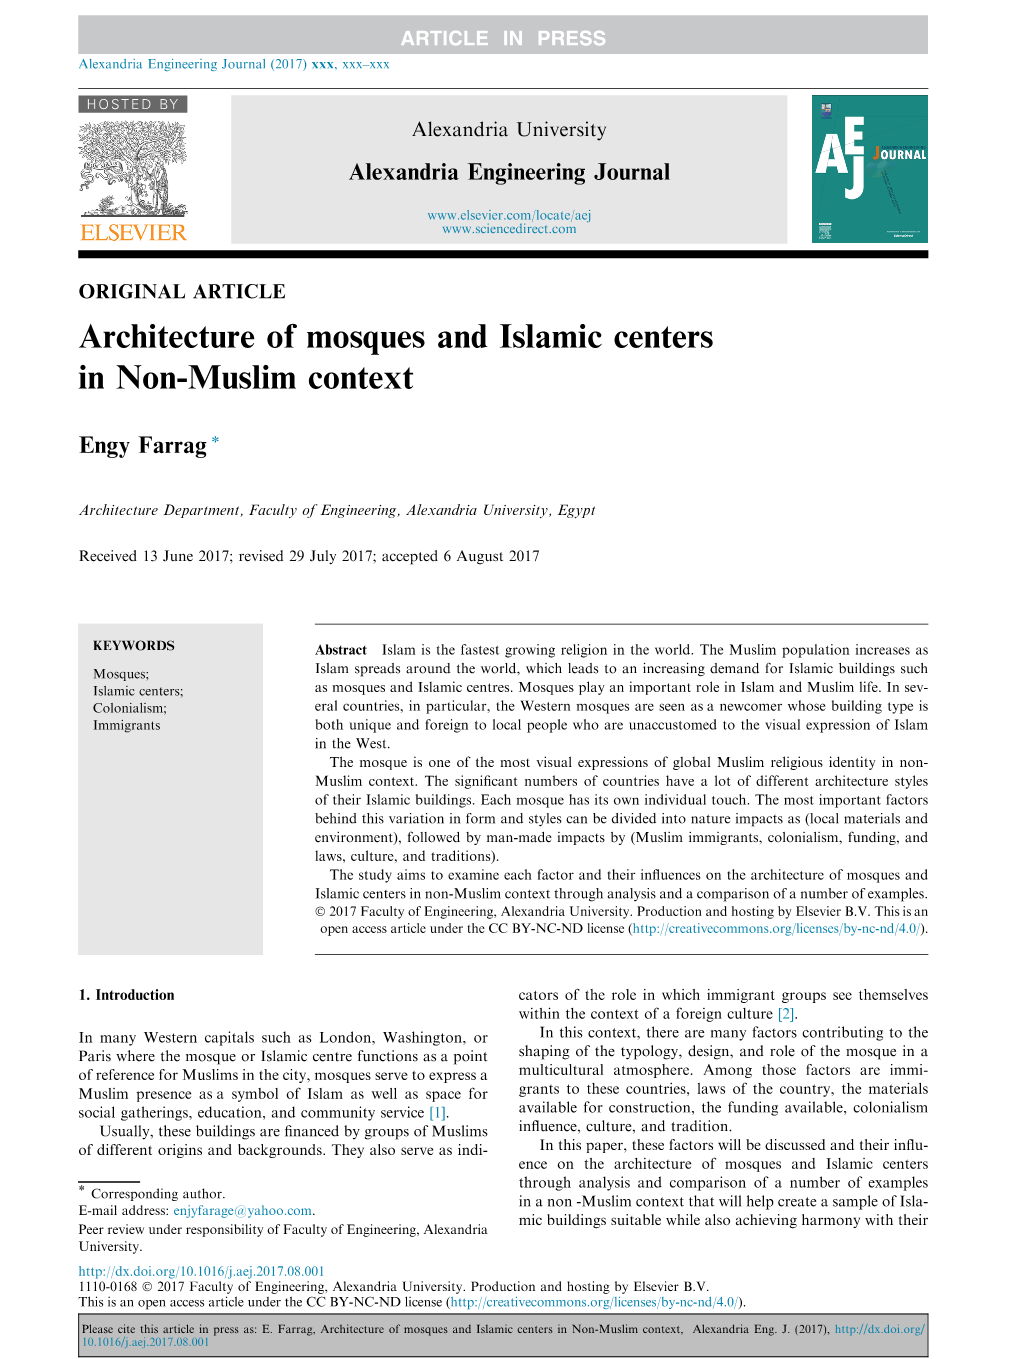 Architecture of Mosques and Islamic Centers in Non-Muslim Context